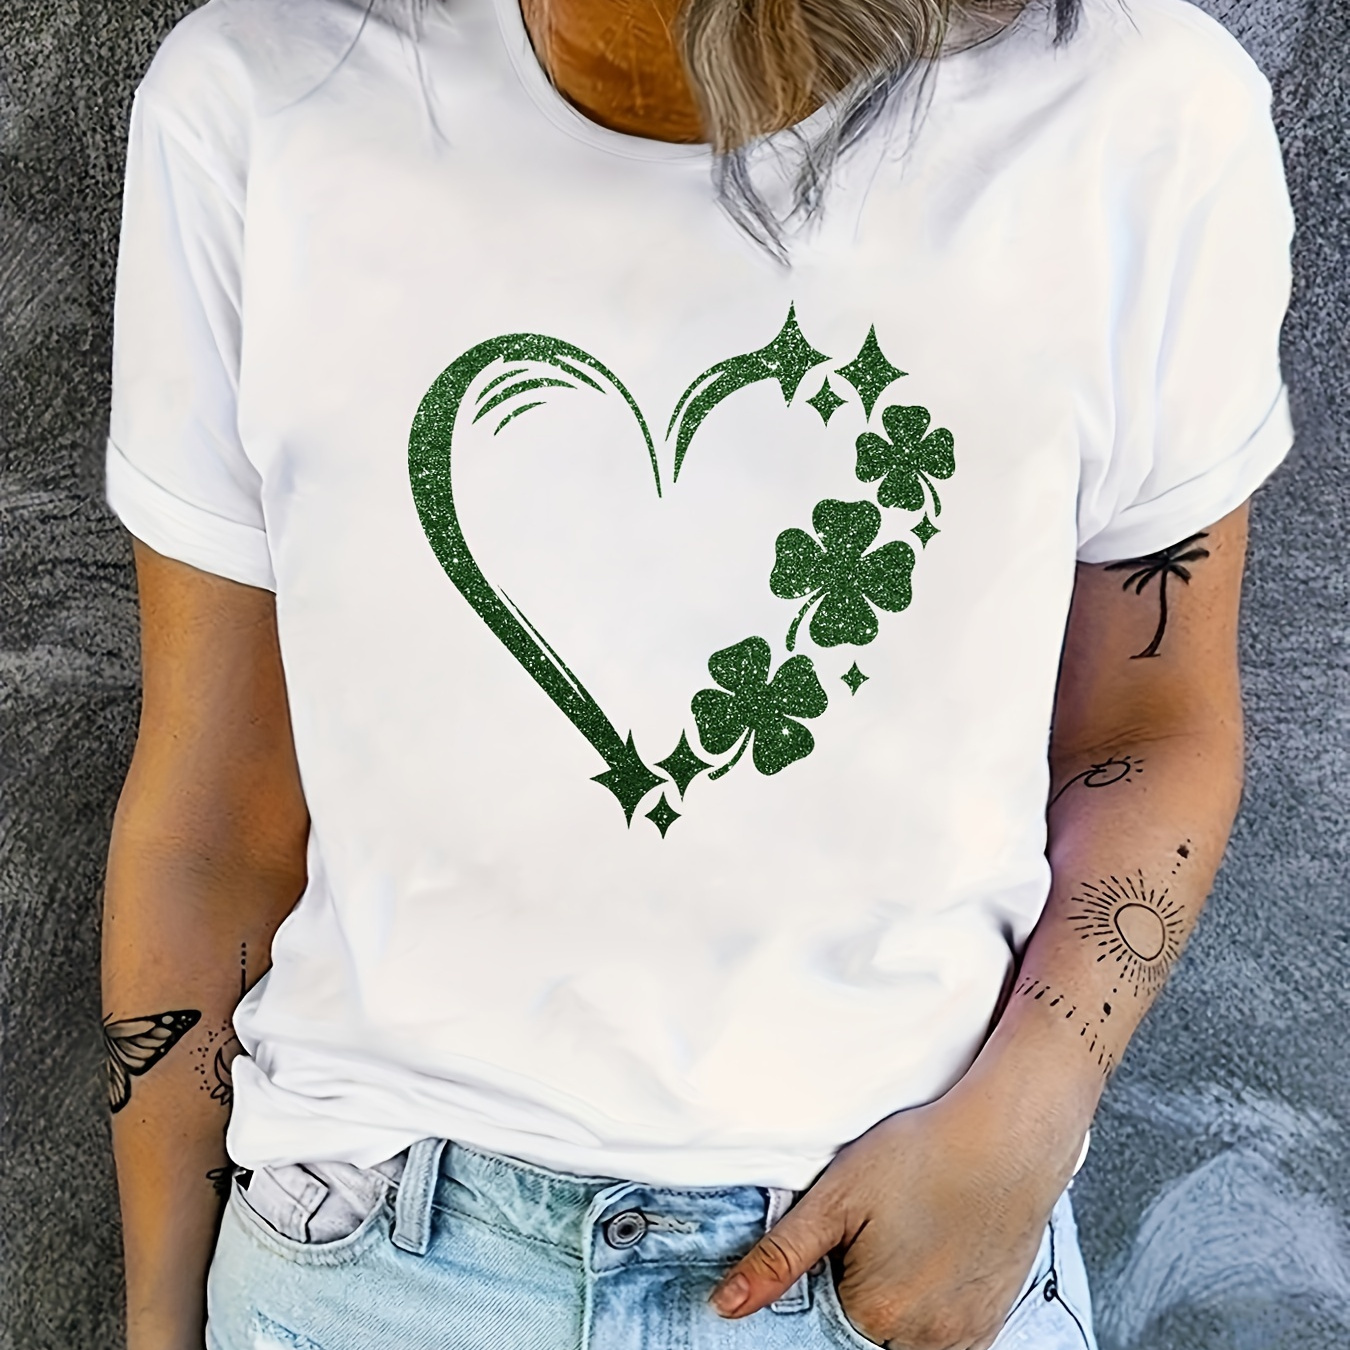 

Heart & Clover Graphic Print T-shirt, Short Sleeve Crew Neck Casual Top For Summer & Spring, Women's Clothing